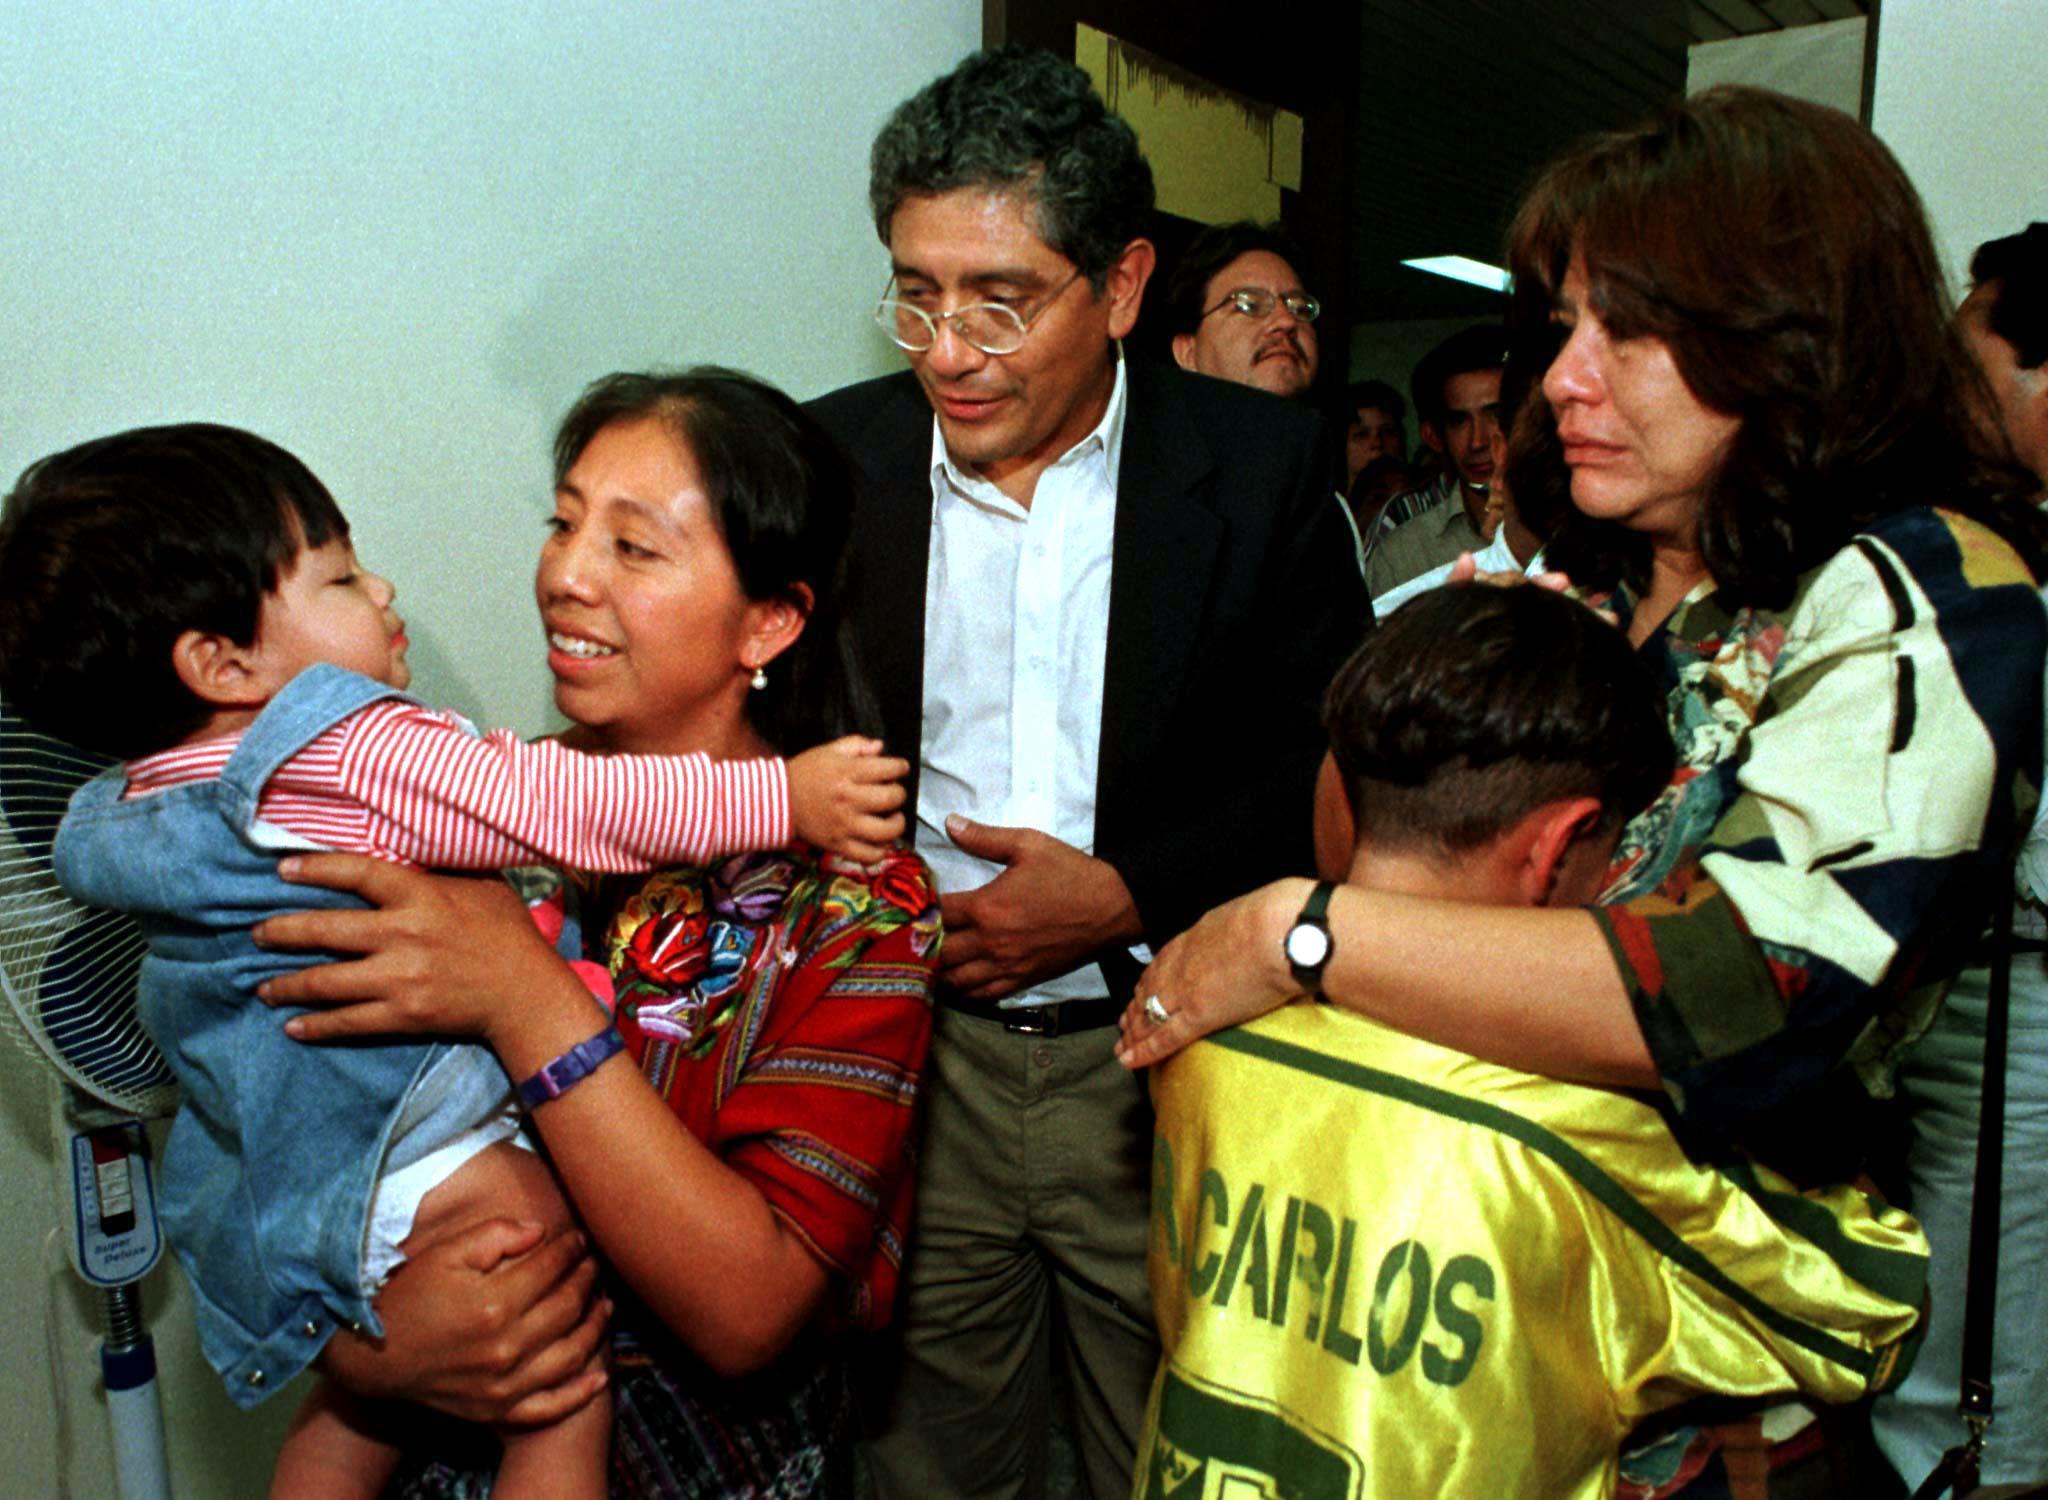 Elivia Ramirez holds her son, Pablito, after recovering him from a foster home in a landmark case, in Guatemala, on August 16, 1998. Elivia says that she was tricked into giving her son for adoption.